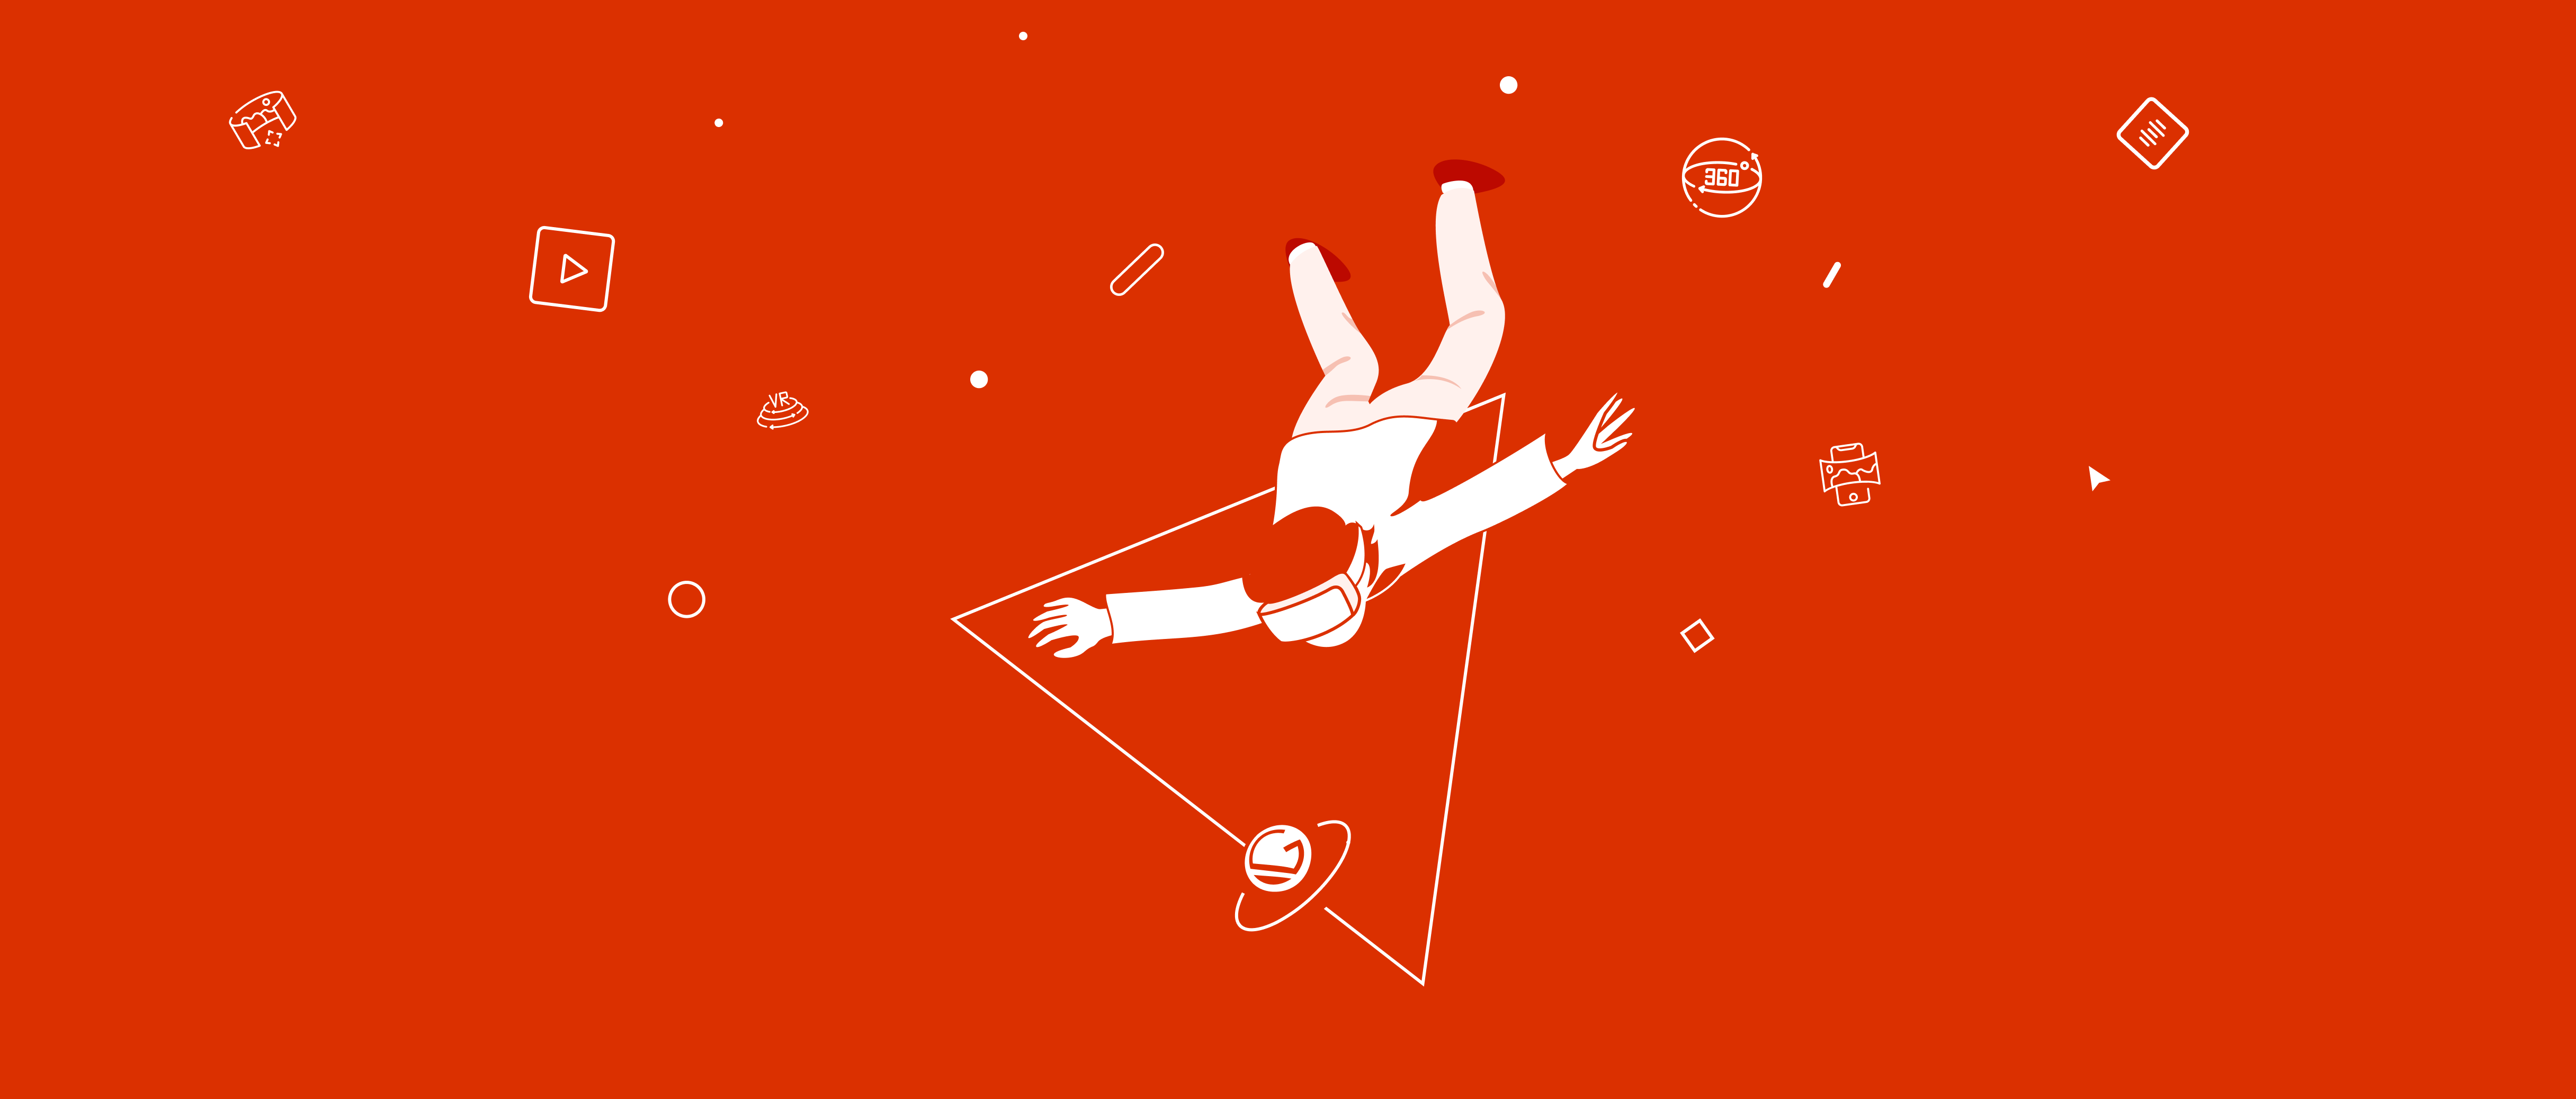 Illustration of person wearing VR goggles and floating in space